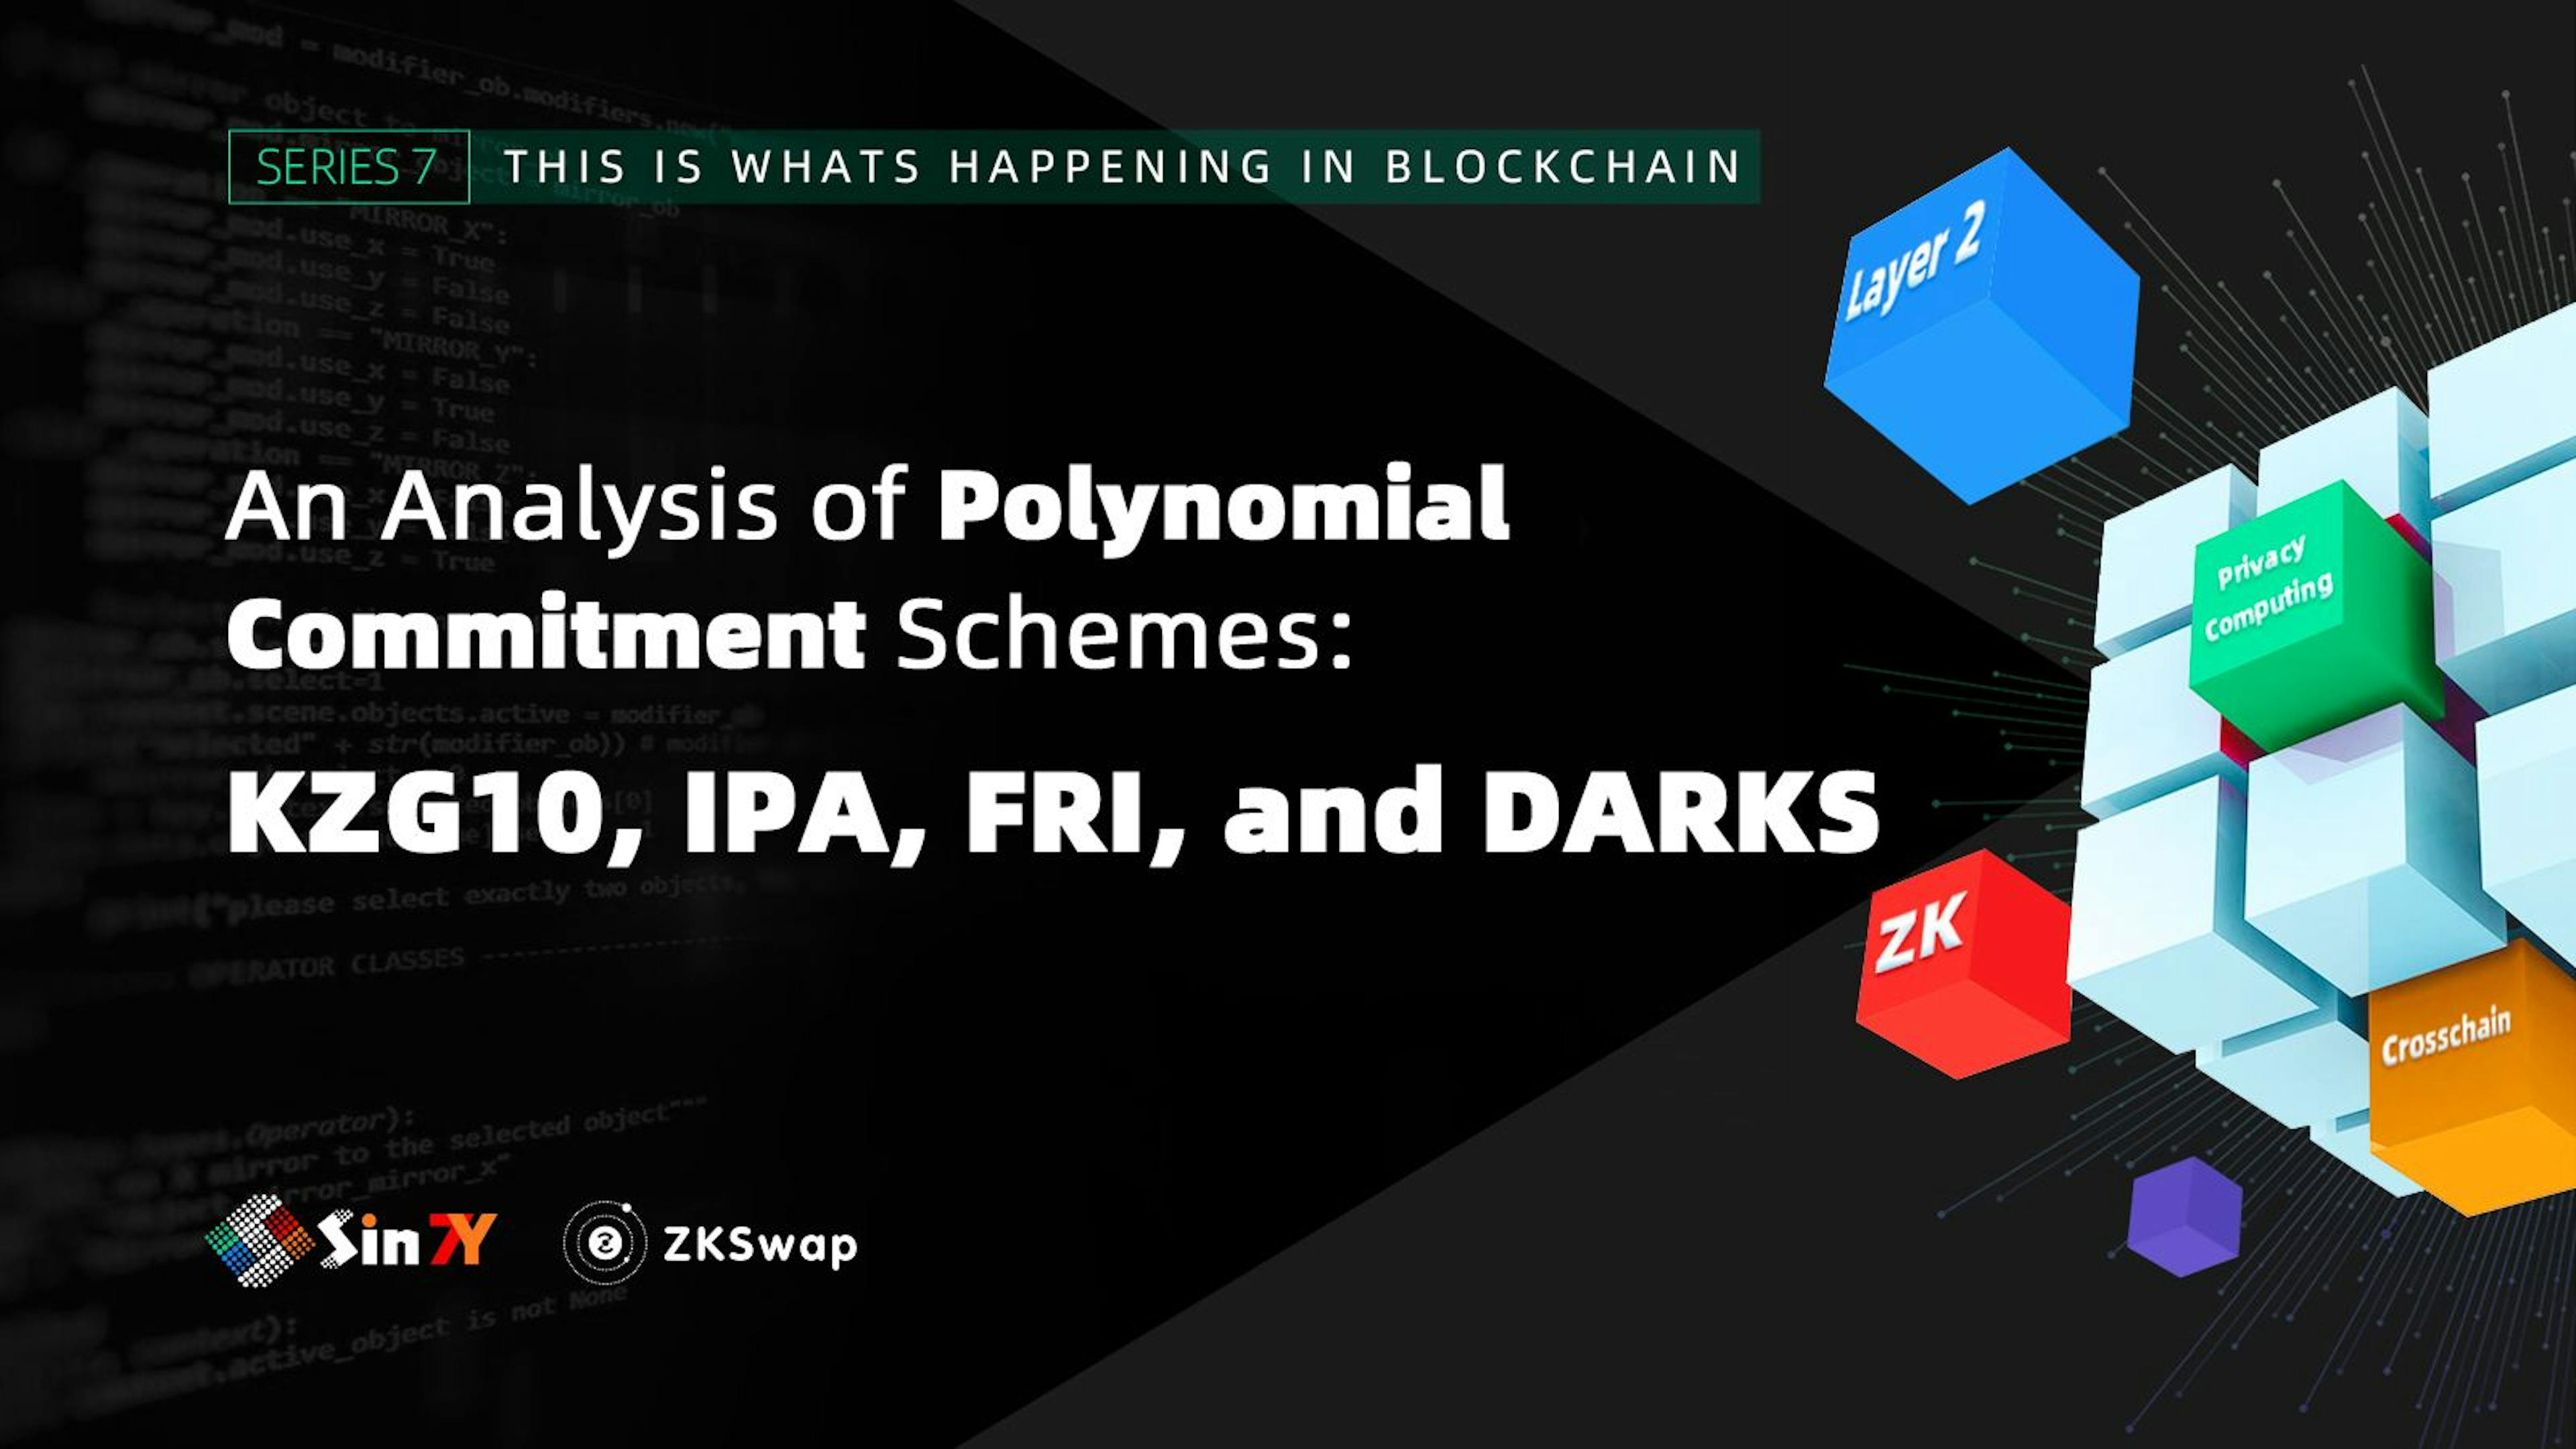 featured image - KZG10, IPA, FRI, and DARKS: Analysis Of Polynomial Commitment Schemes